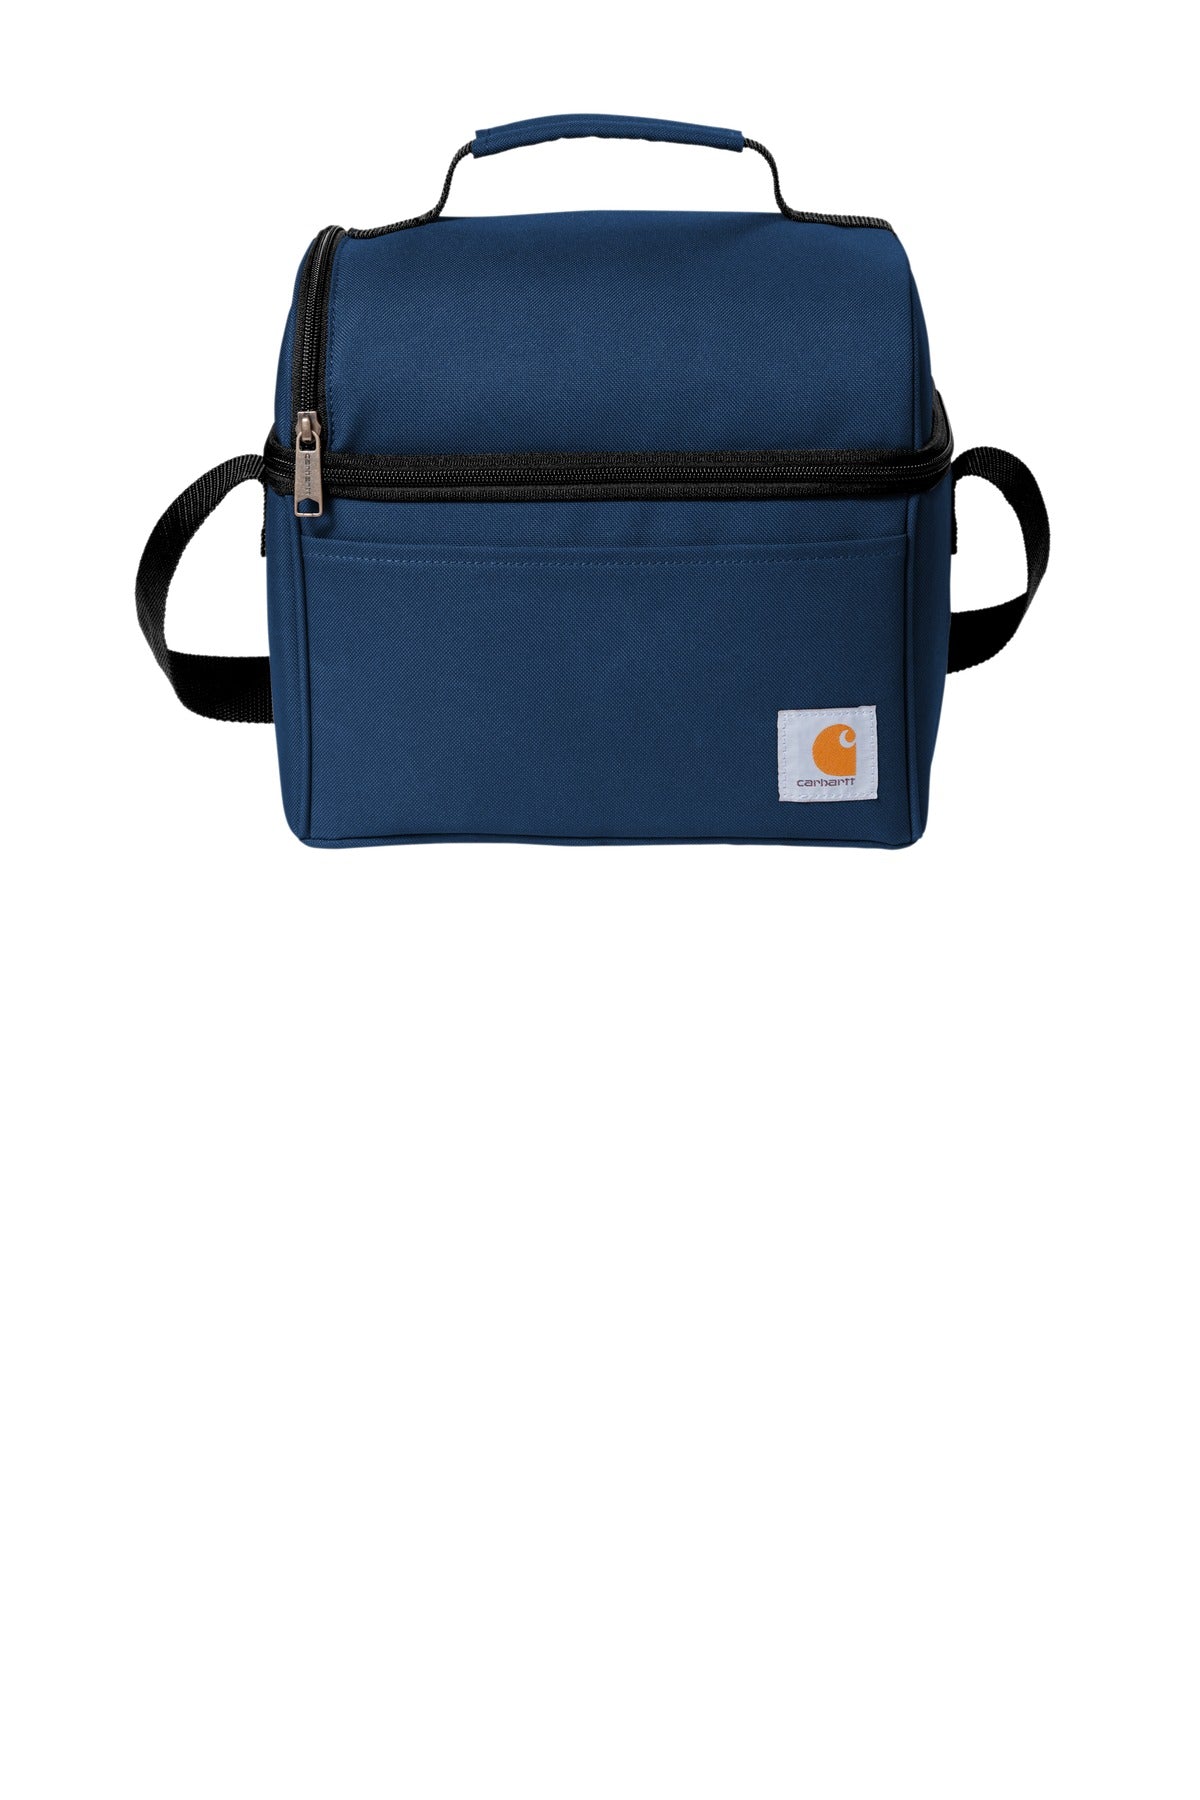 Carhartt  Lunch 6-Can Cooler. CT89251601